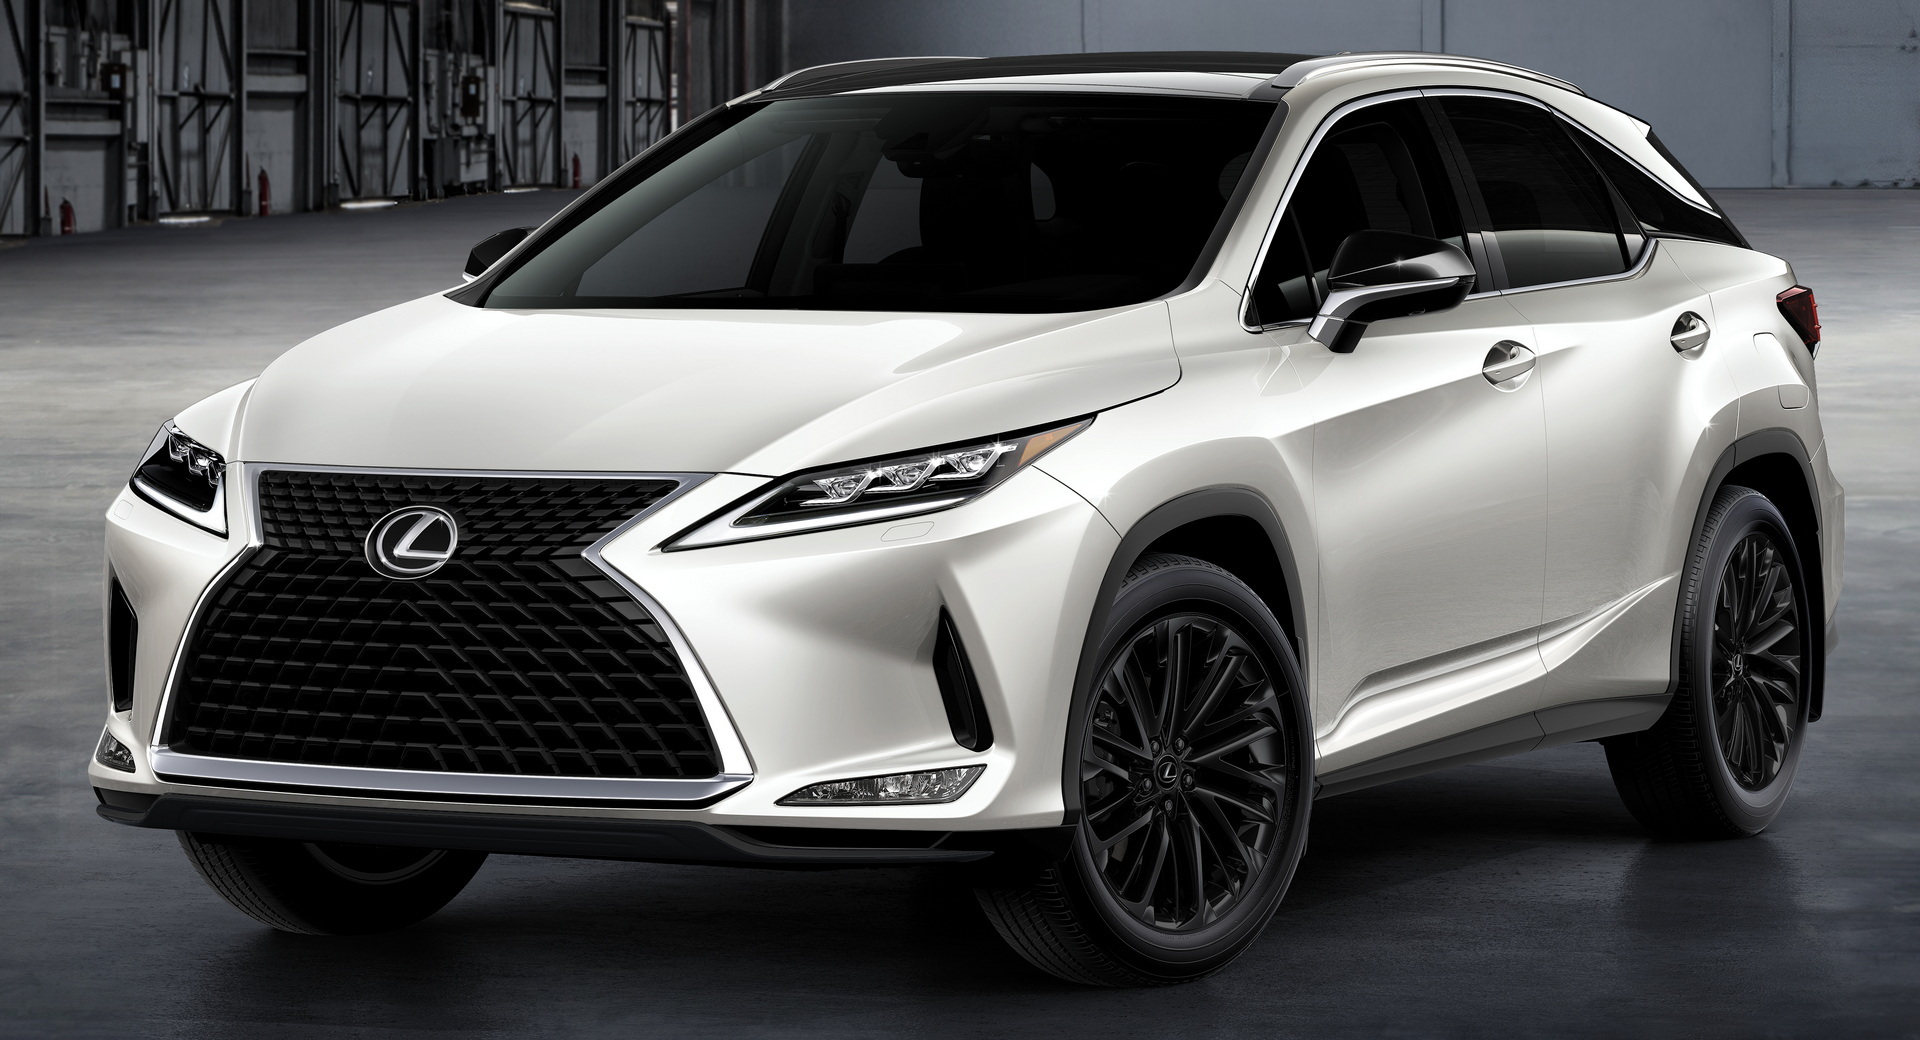 Refreshed 2022 Lexus RX Black Line Trim Will Be Limited To Just 2,500